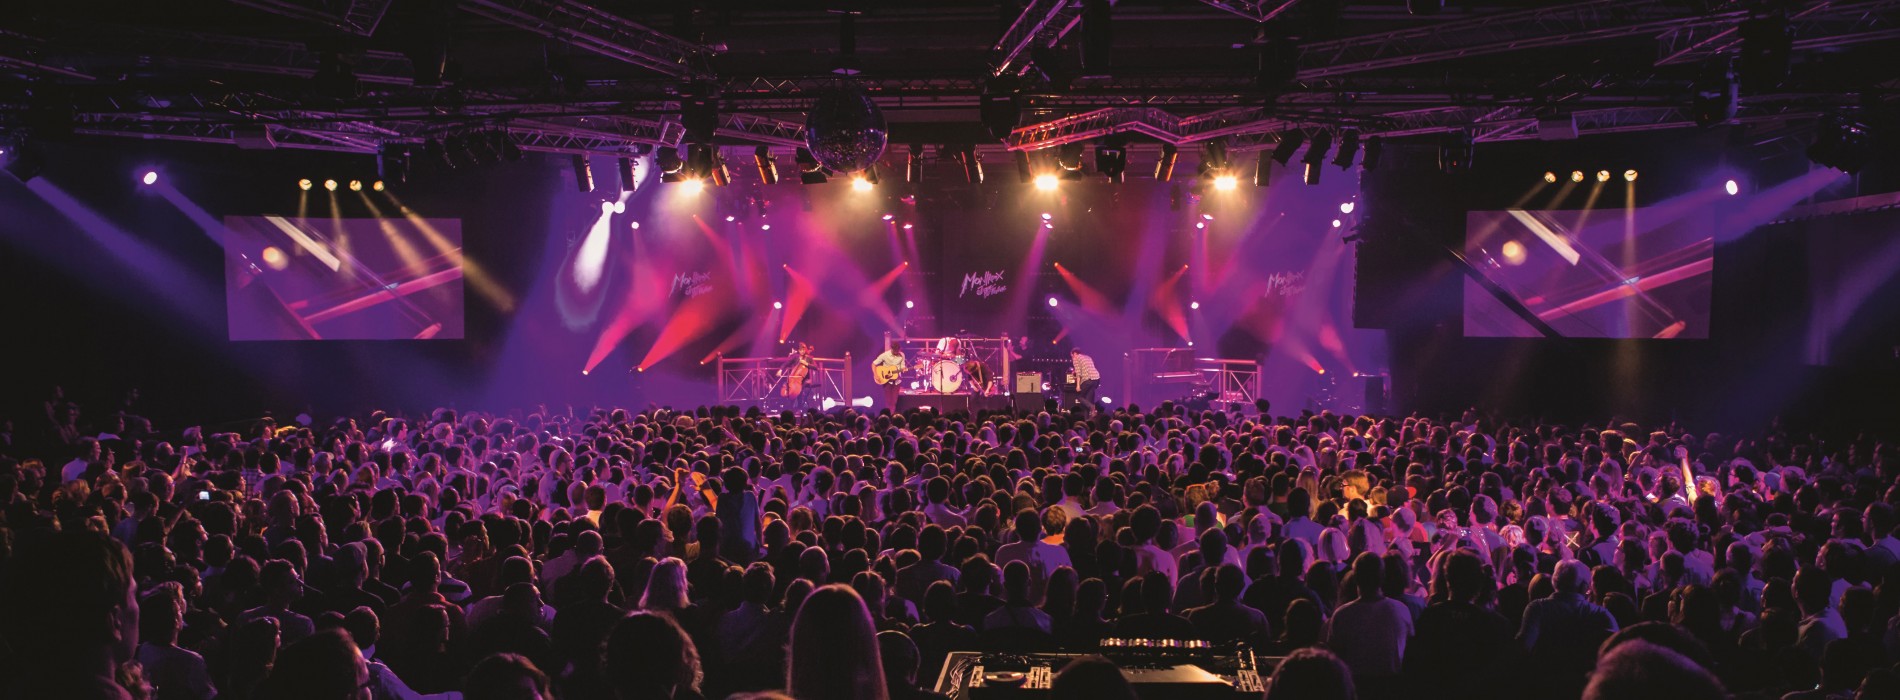 Montreux Jazz Festival kick starts from 29th June to 14th July 2018